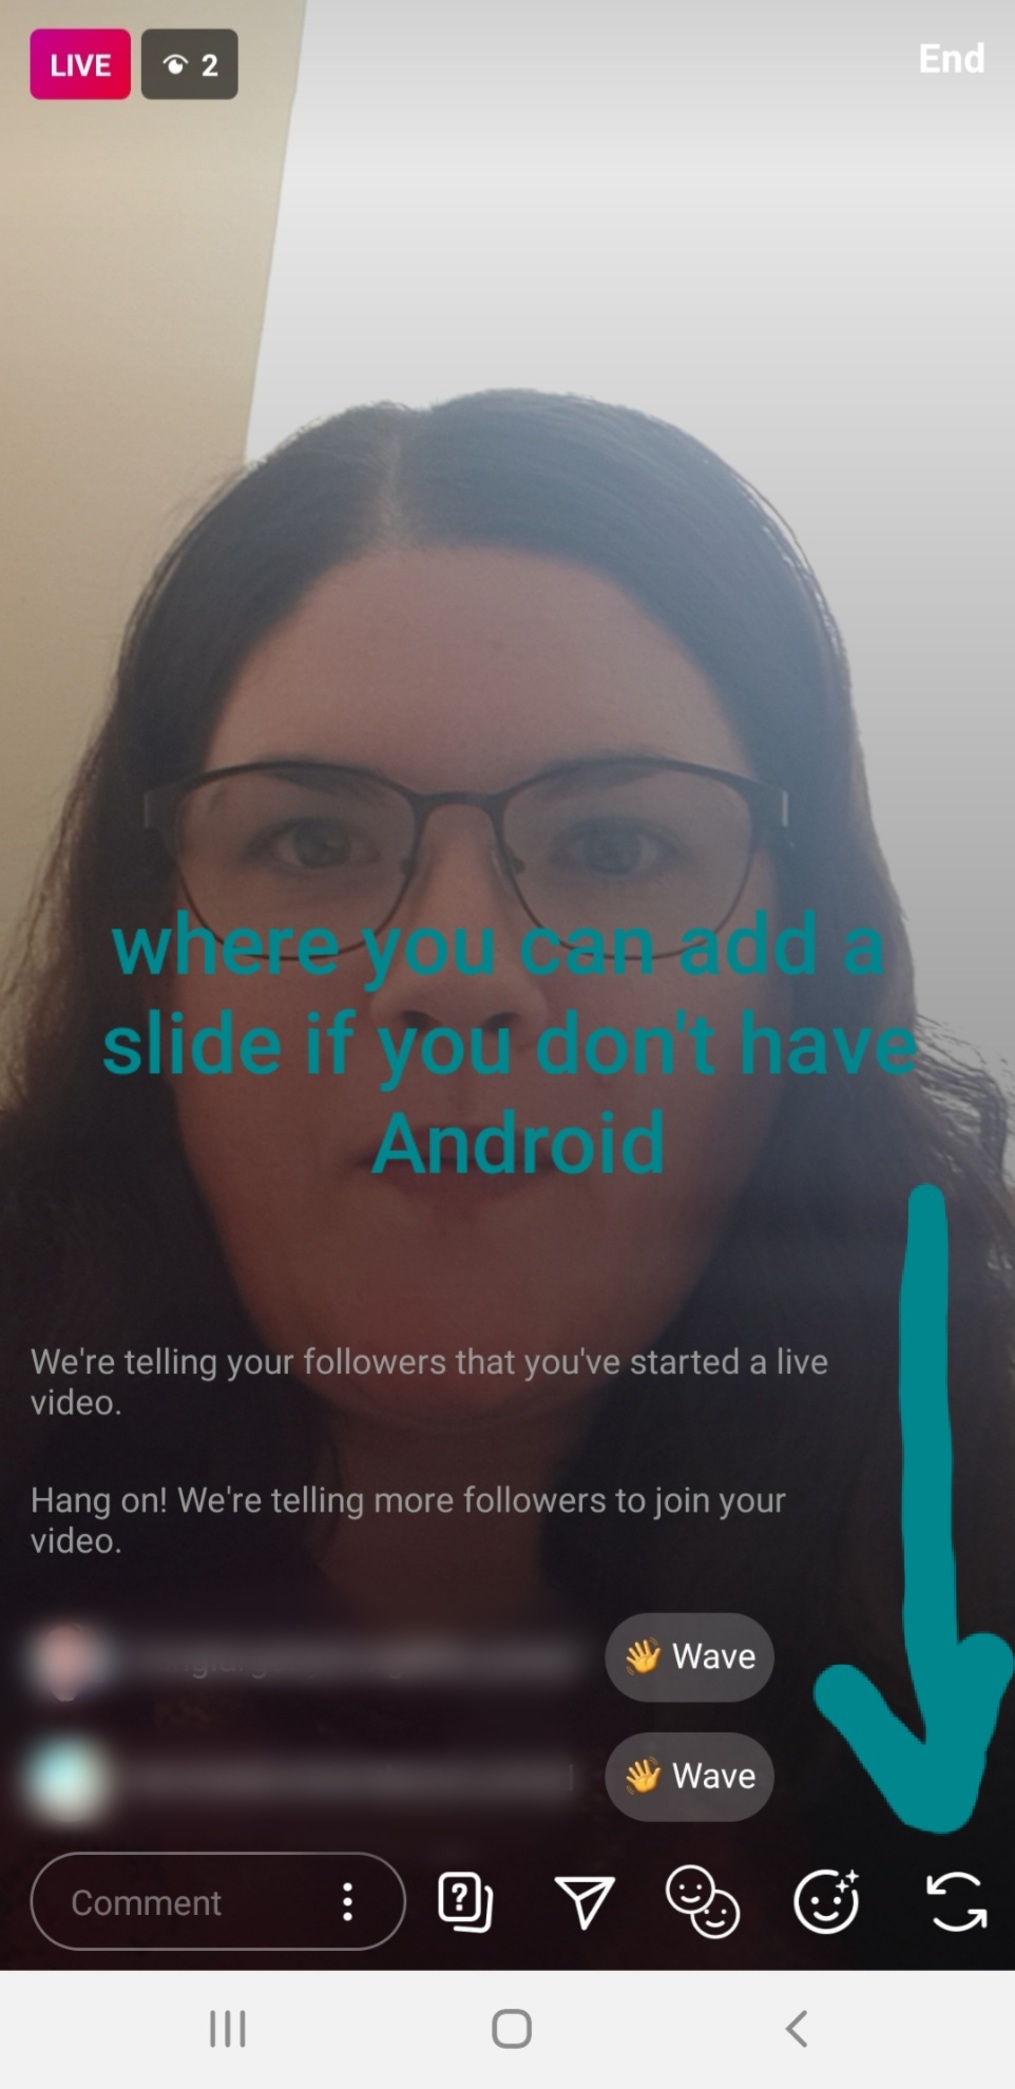 Screenshot-taken-during-an-IG-Live-for-Writers-Instagram-Live-for-writers-susan-shiney-pointing-to-the-area-that-Android-is-different-than-an-iphone